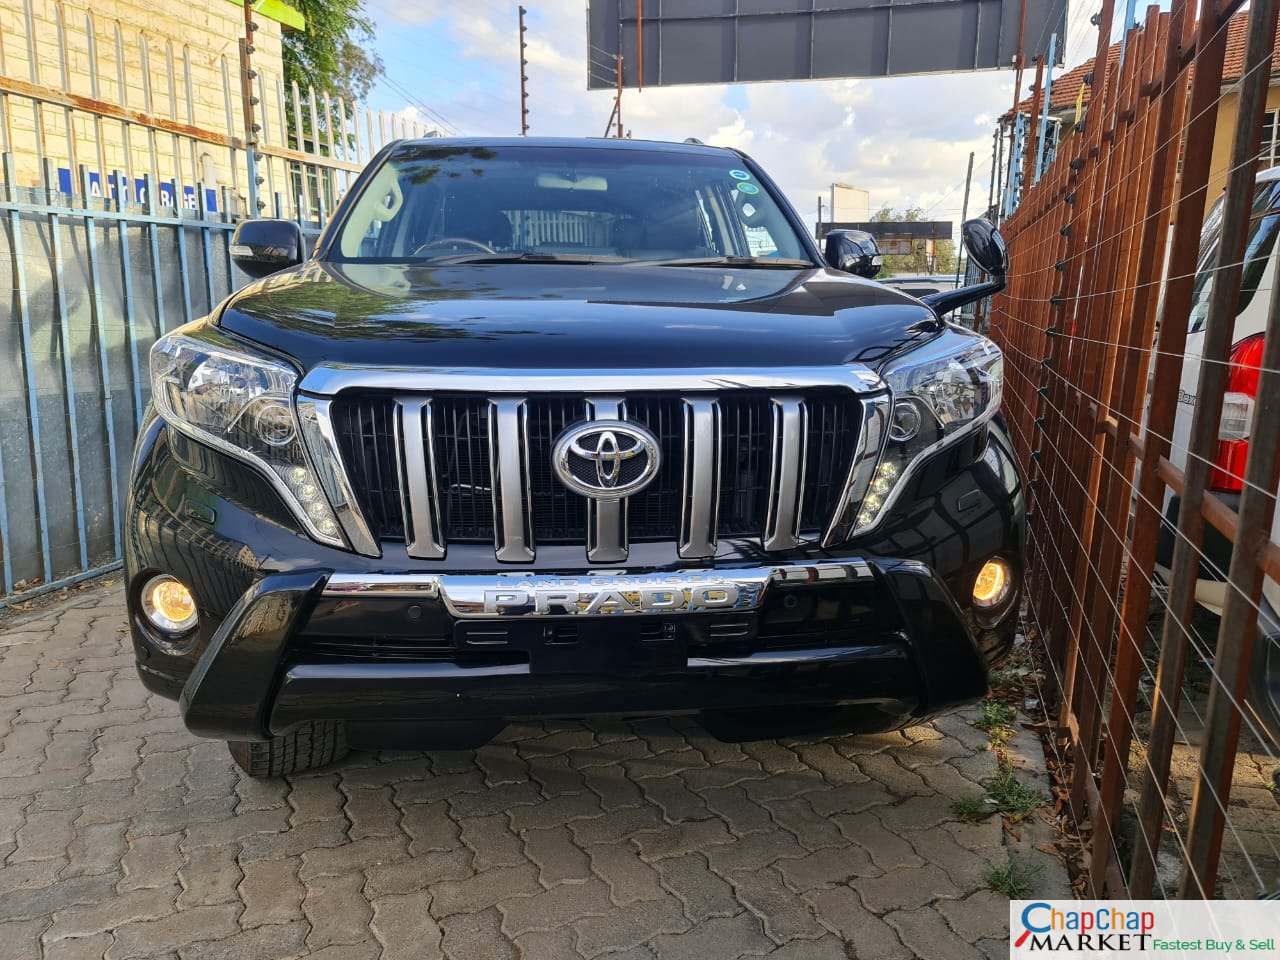 Toyota PRADO 2017 Sunroof 5.5M ONLY Quick SALE TRADE IN OK EXCLUSIVE!